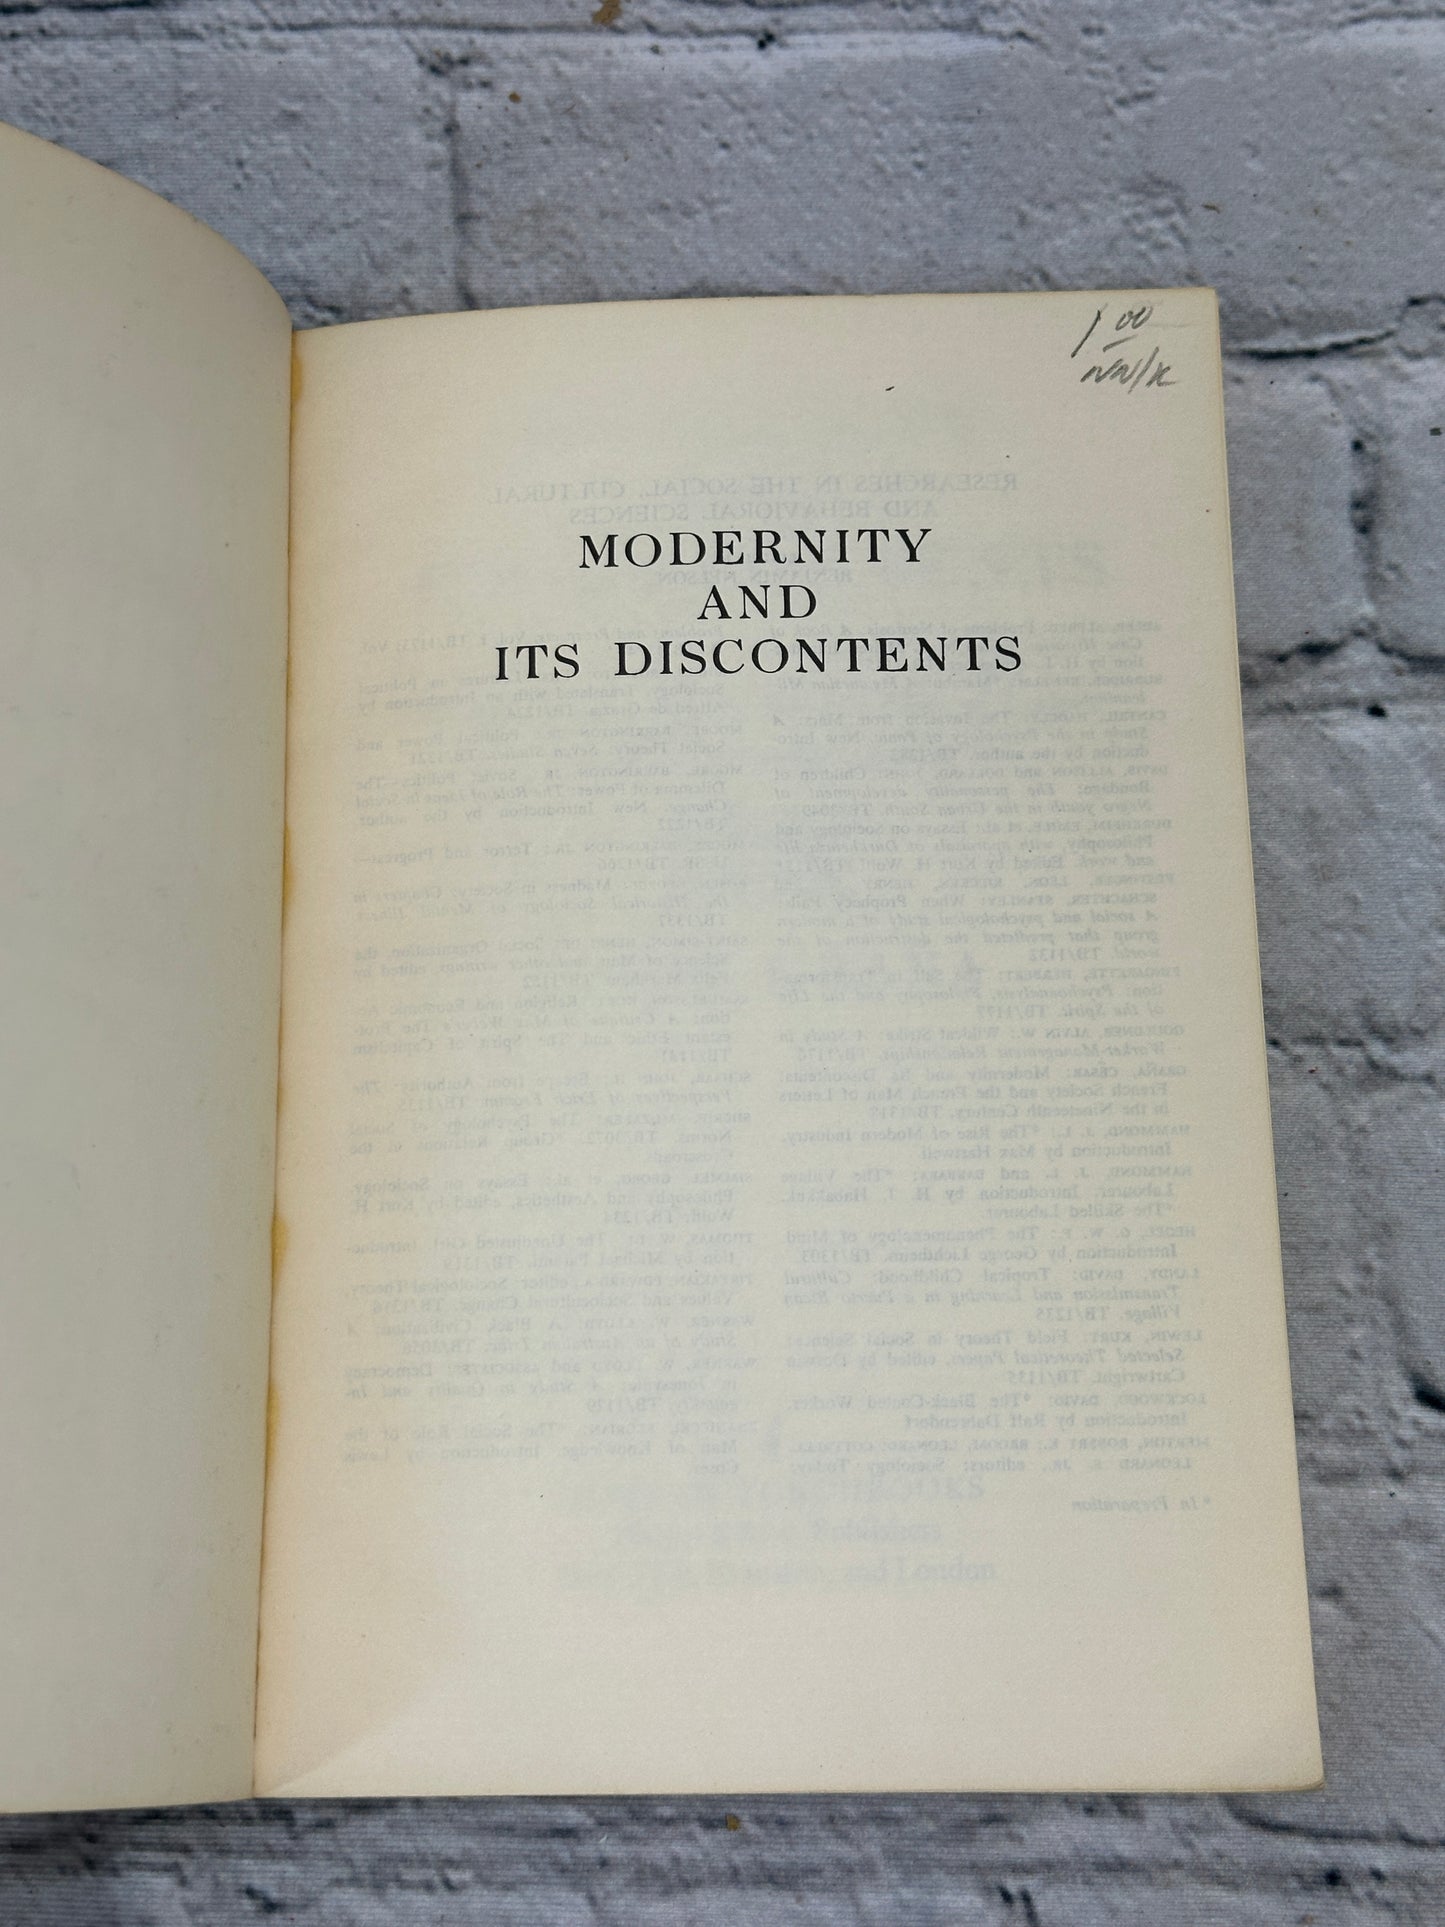 Modernity and its Discontents: French Society and..by Cesar Grana [1967]